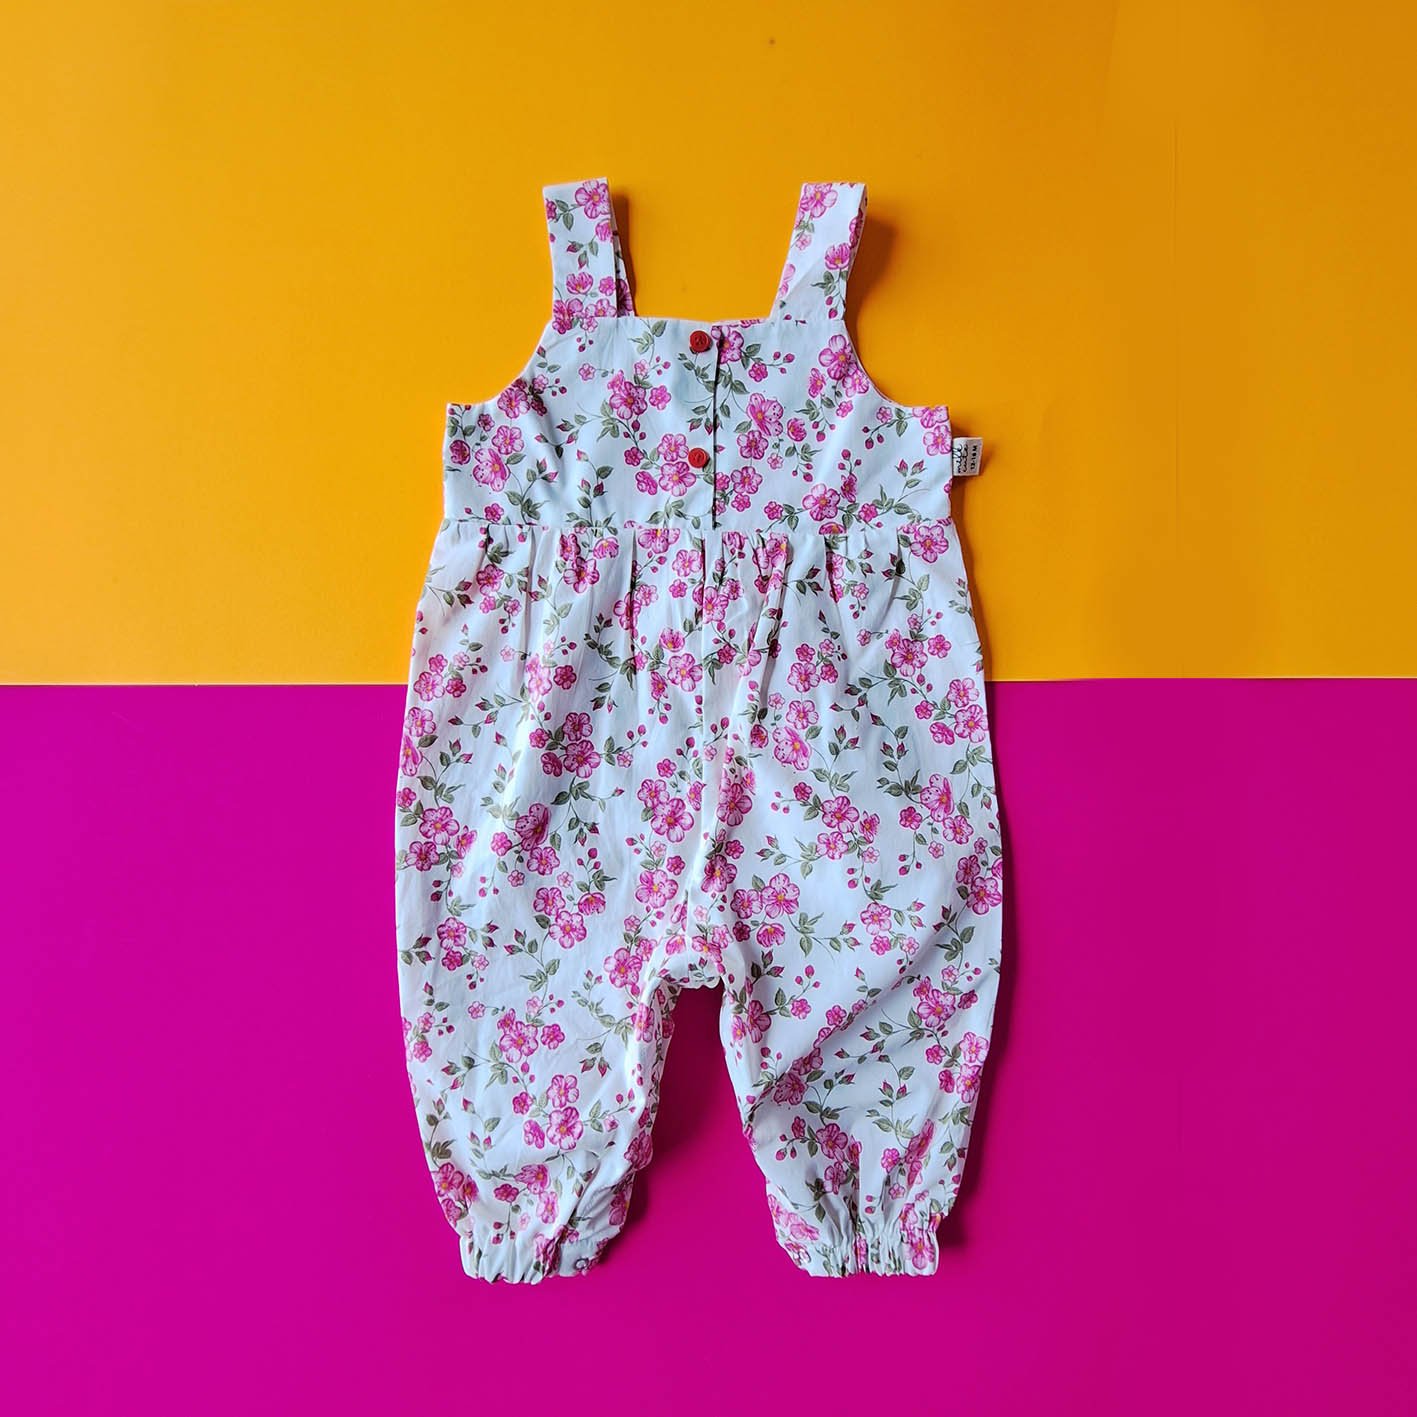 CNY COL. WHITE CHEERY BLOSSOM  JUMPSUIT 100% COTTON PRINTED